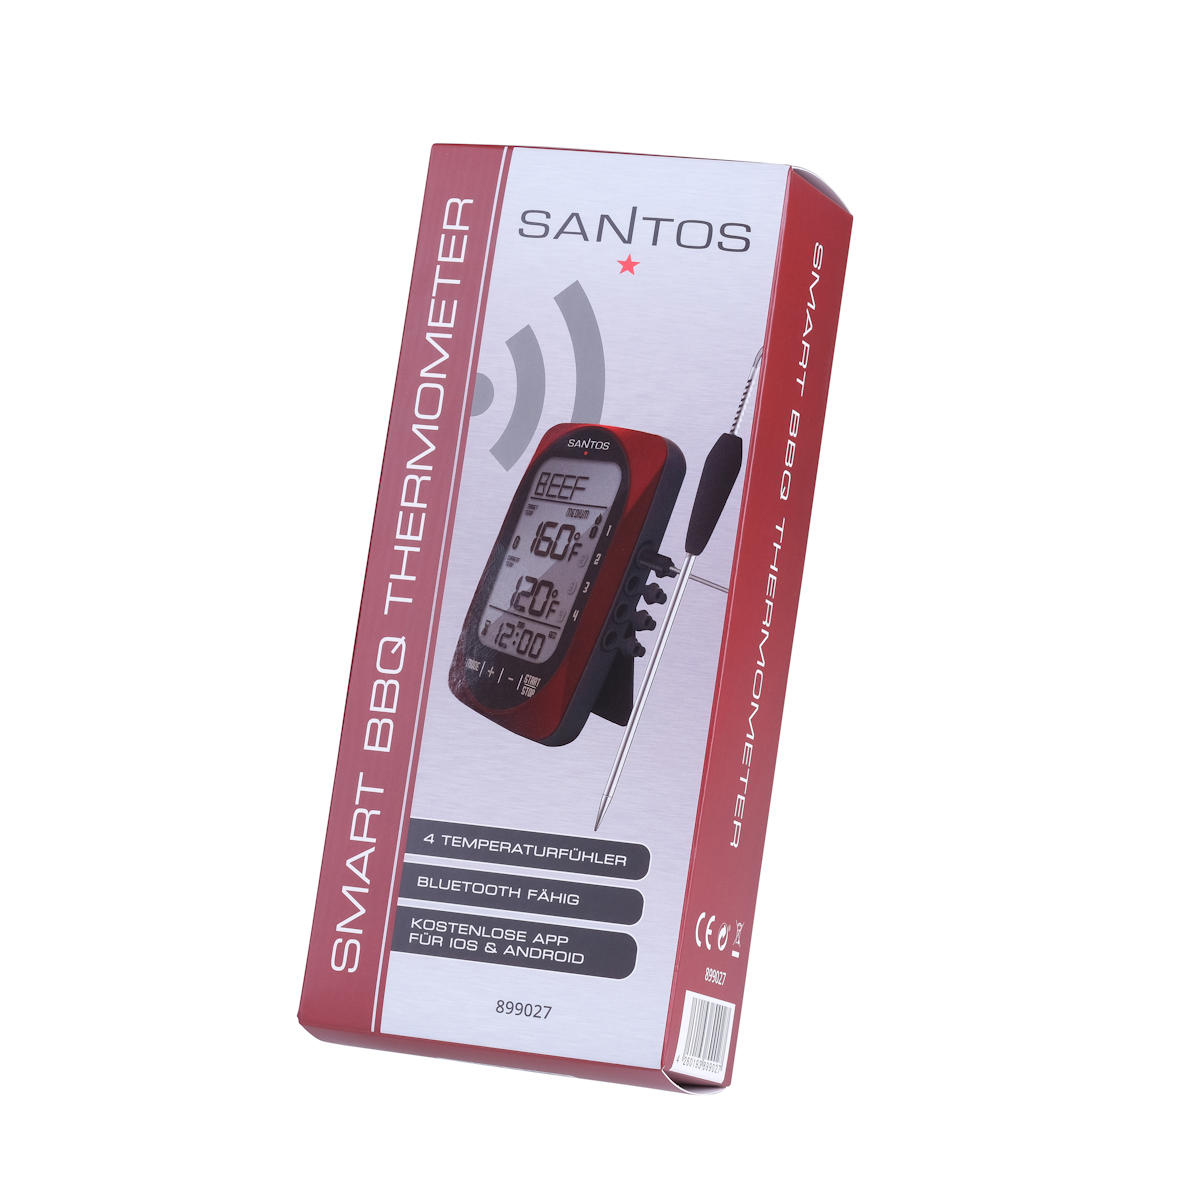 SANTOS Smart BBQ Thermometer Verpackung